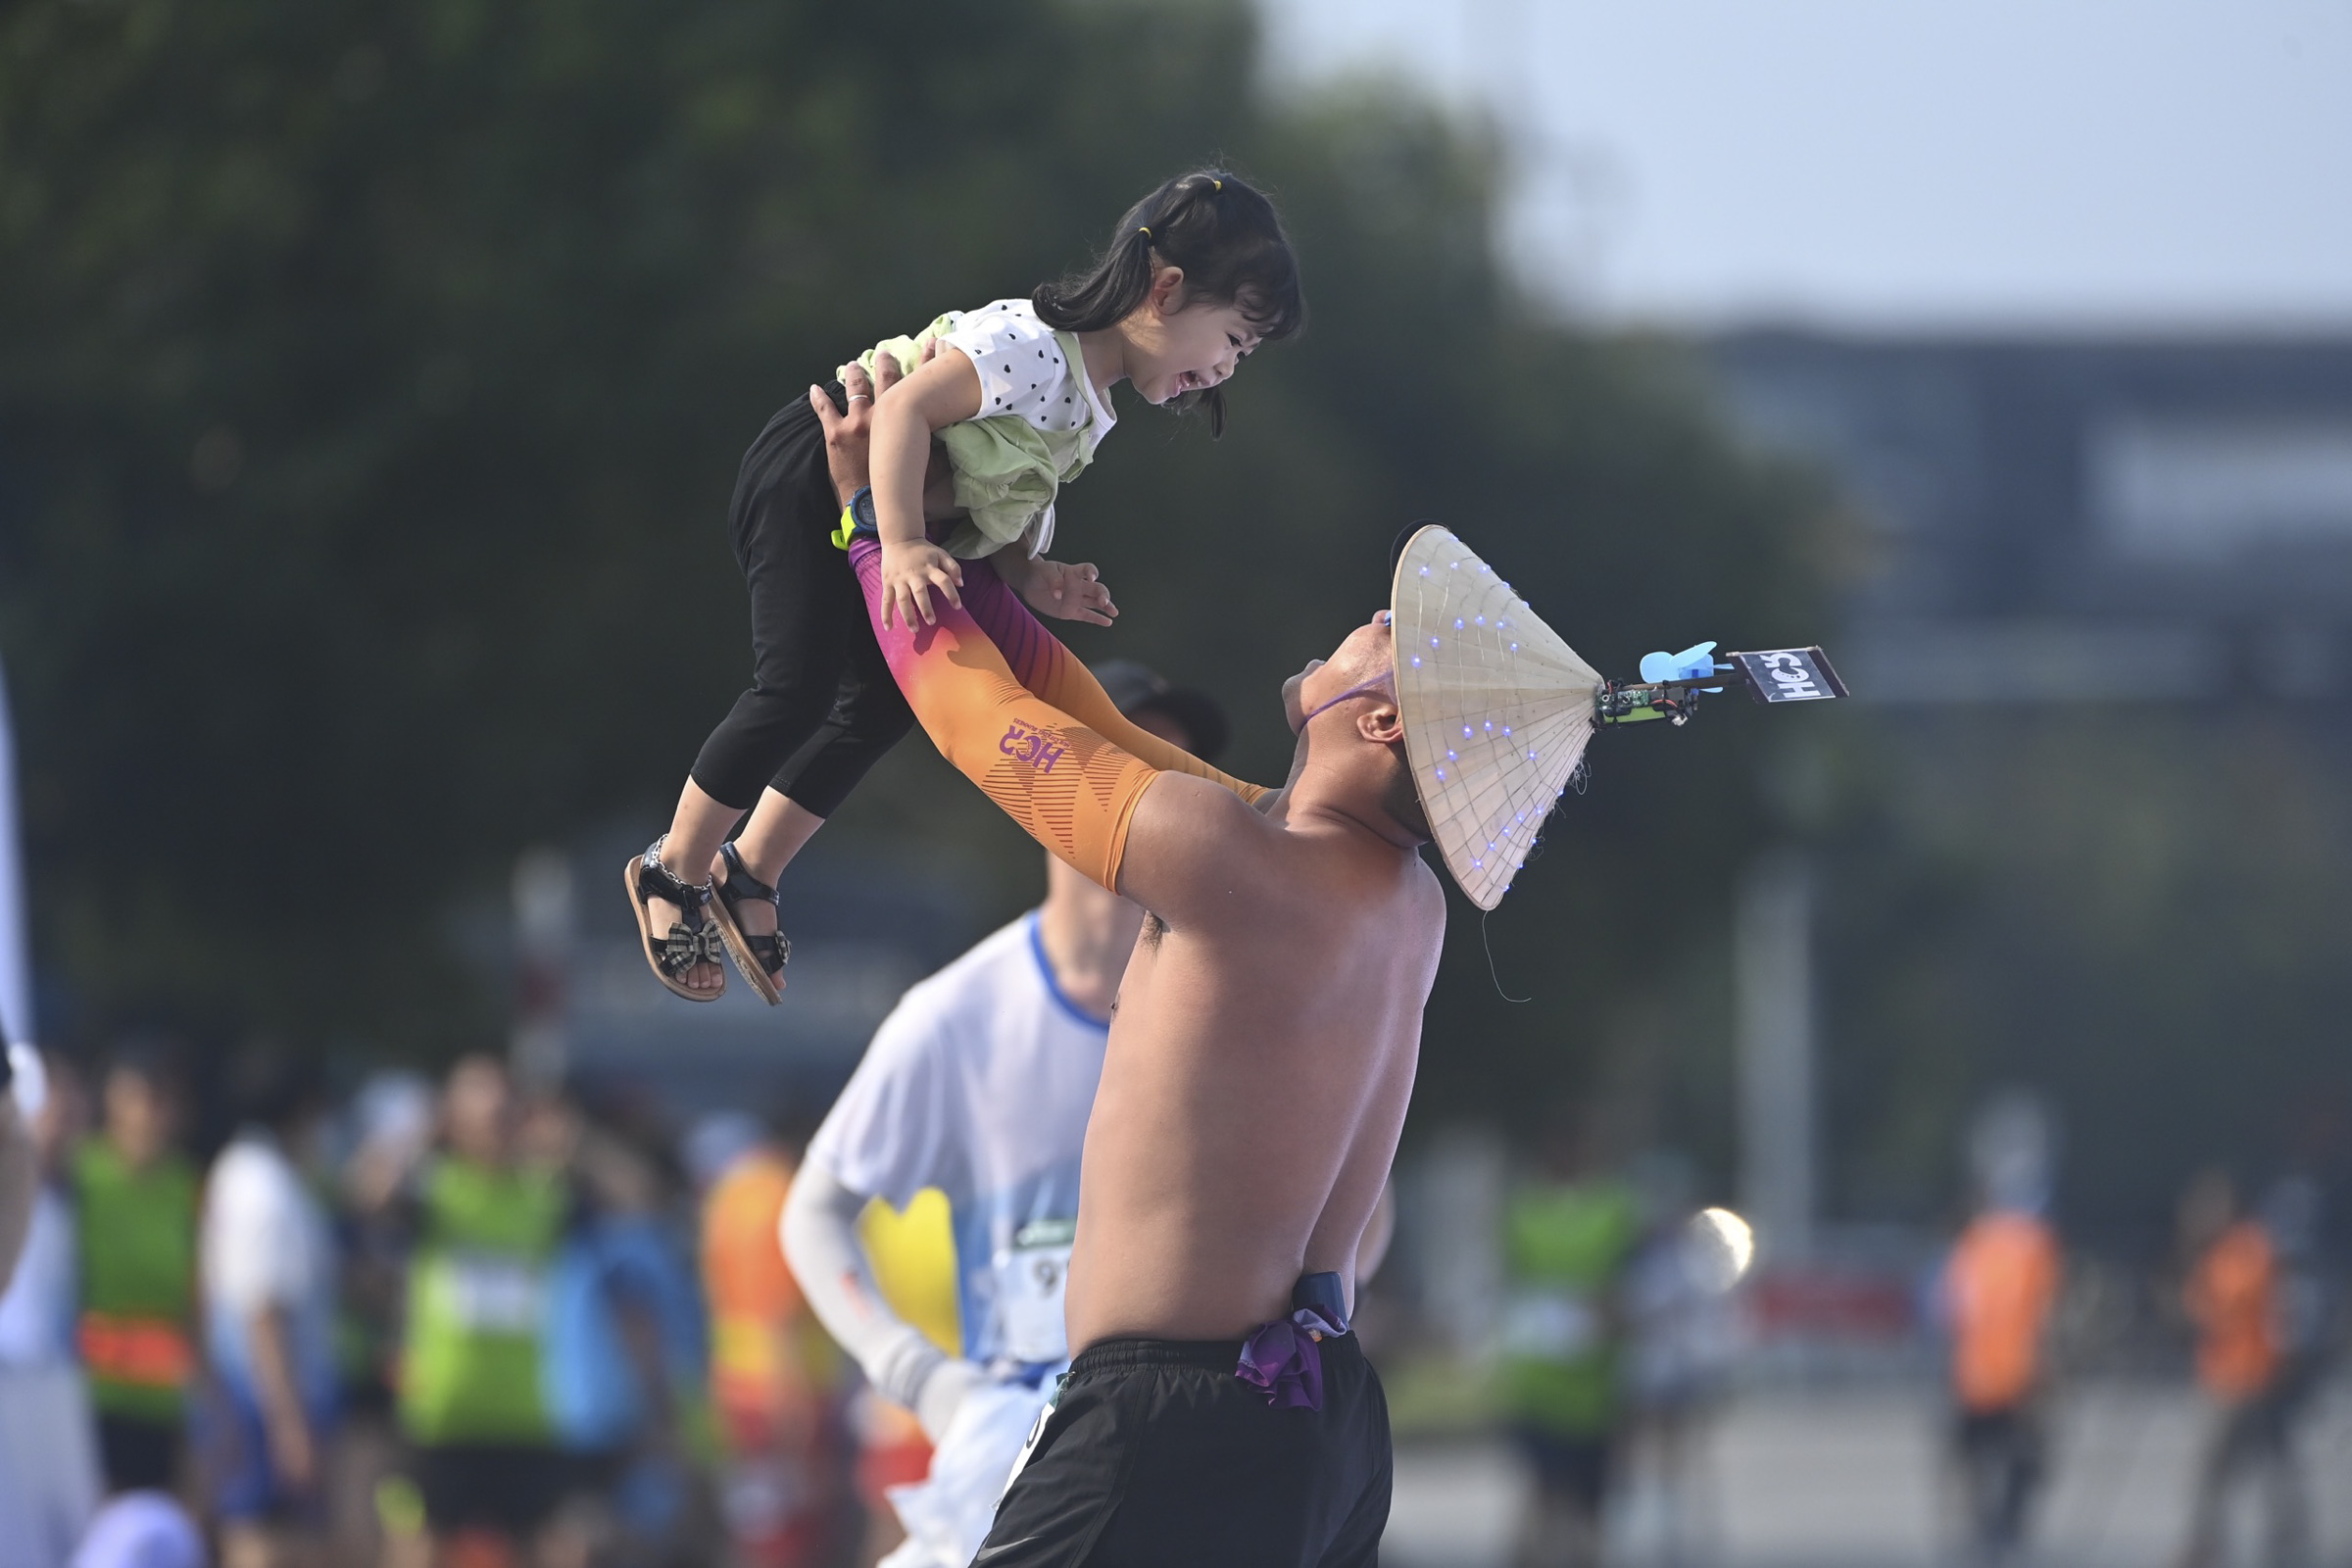 Wearing the Vietnamese conical hat non la, a runner lifts his daughter in celebration.